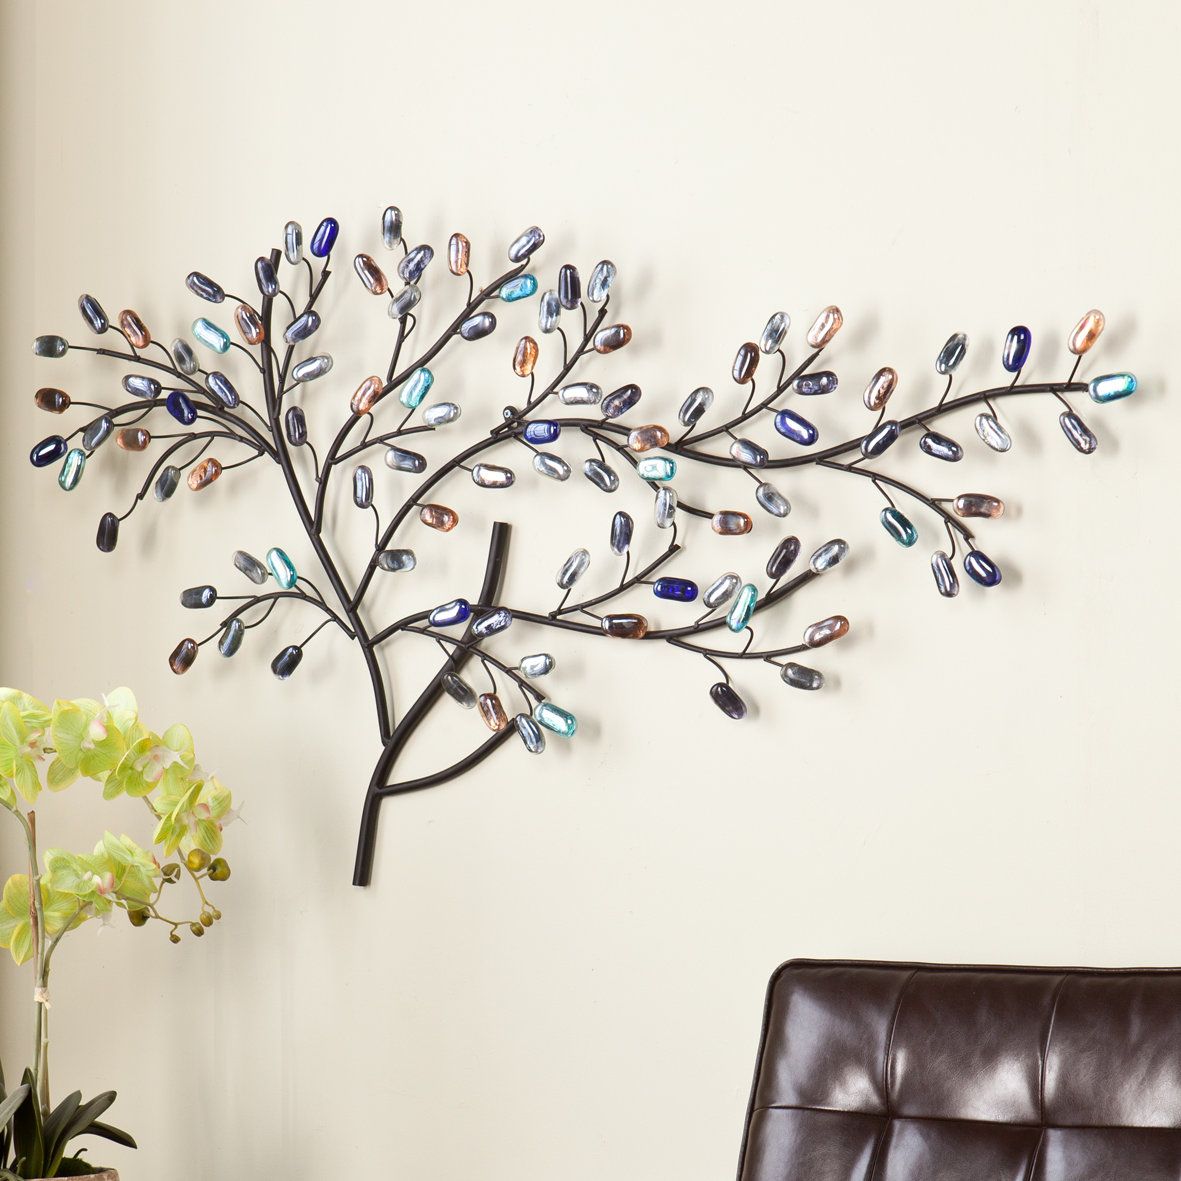 World Menagerie Metal Wall Art You'll Love In 2019 | Wayfair Within Wall Decor By World Menagerie (Photo 7 of 30)